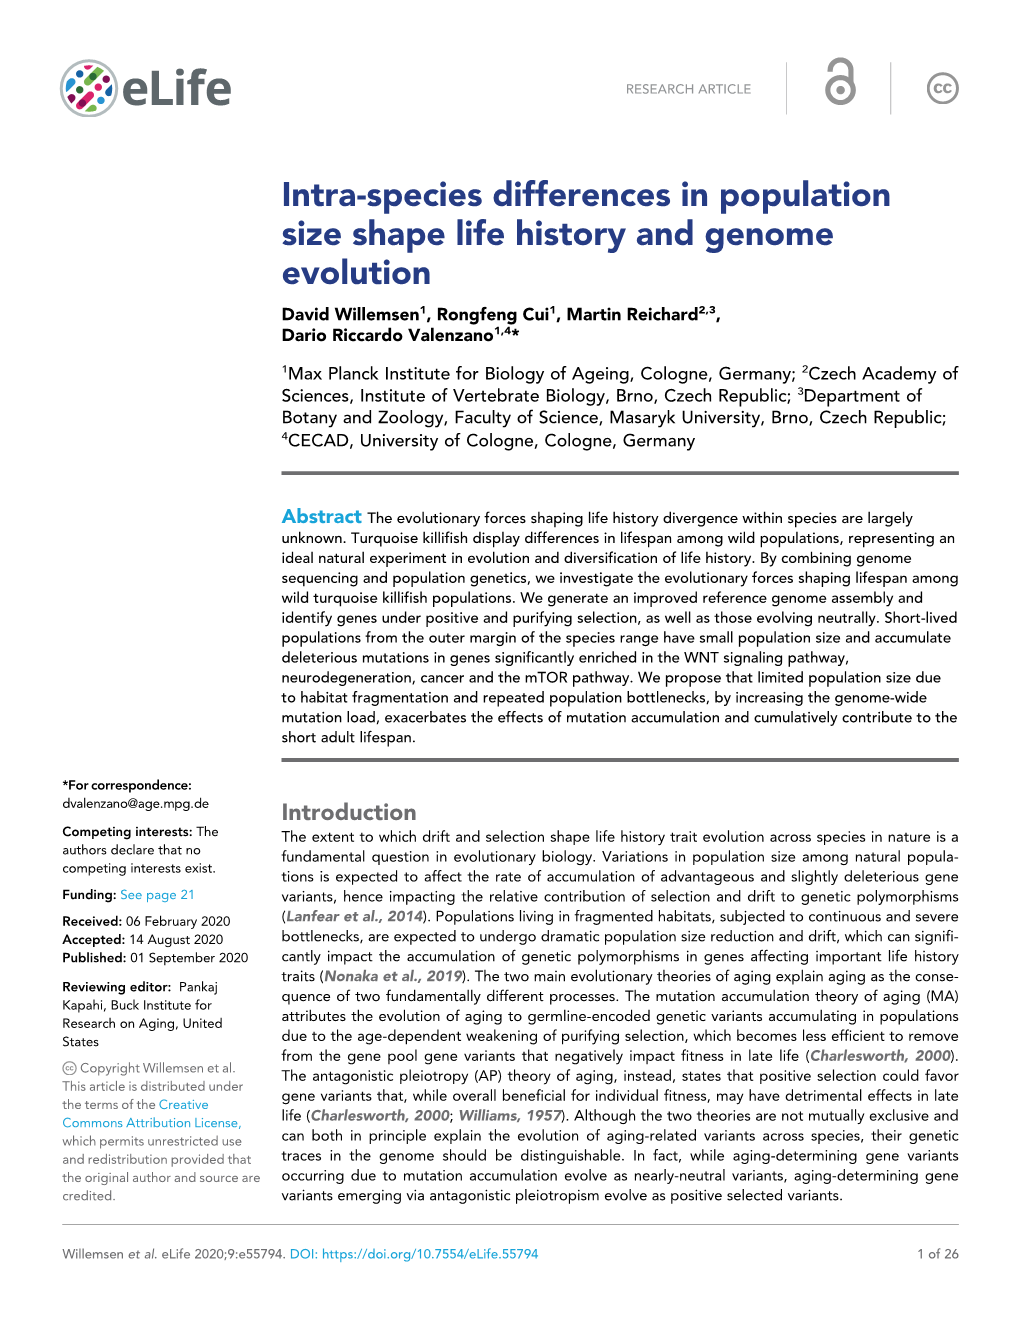 Intra-Species Differences in Population Size Shape Life History and Genome Evolution David Willemsen1, Rongfeng Cui1, Martin Reichard2,3, Dario Riccardo Valenzano1,4*